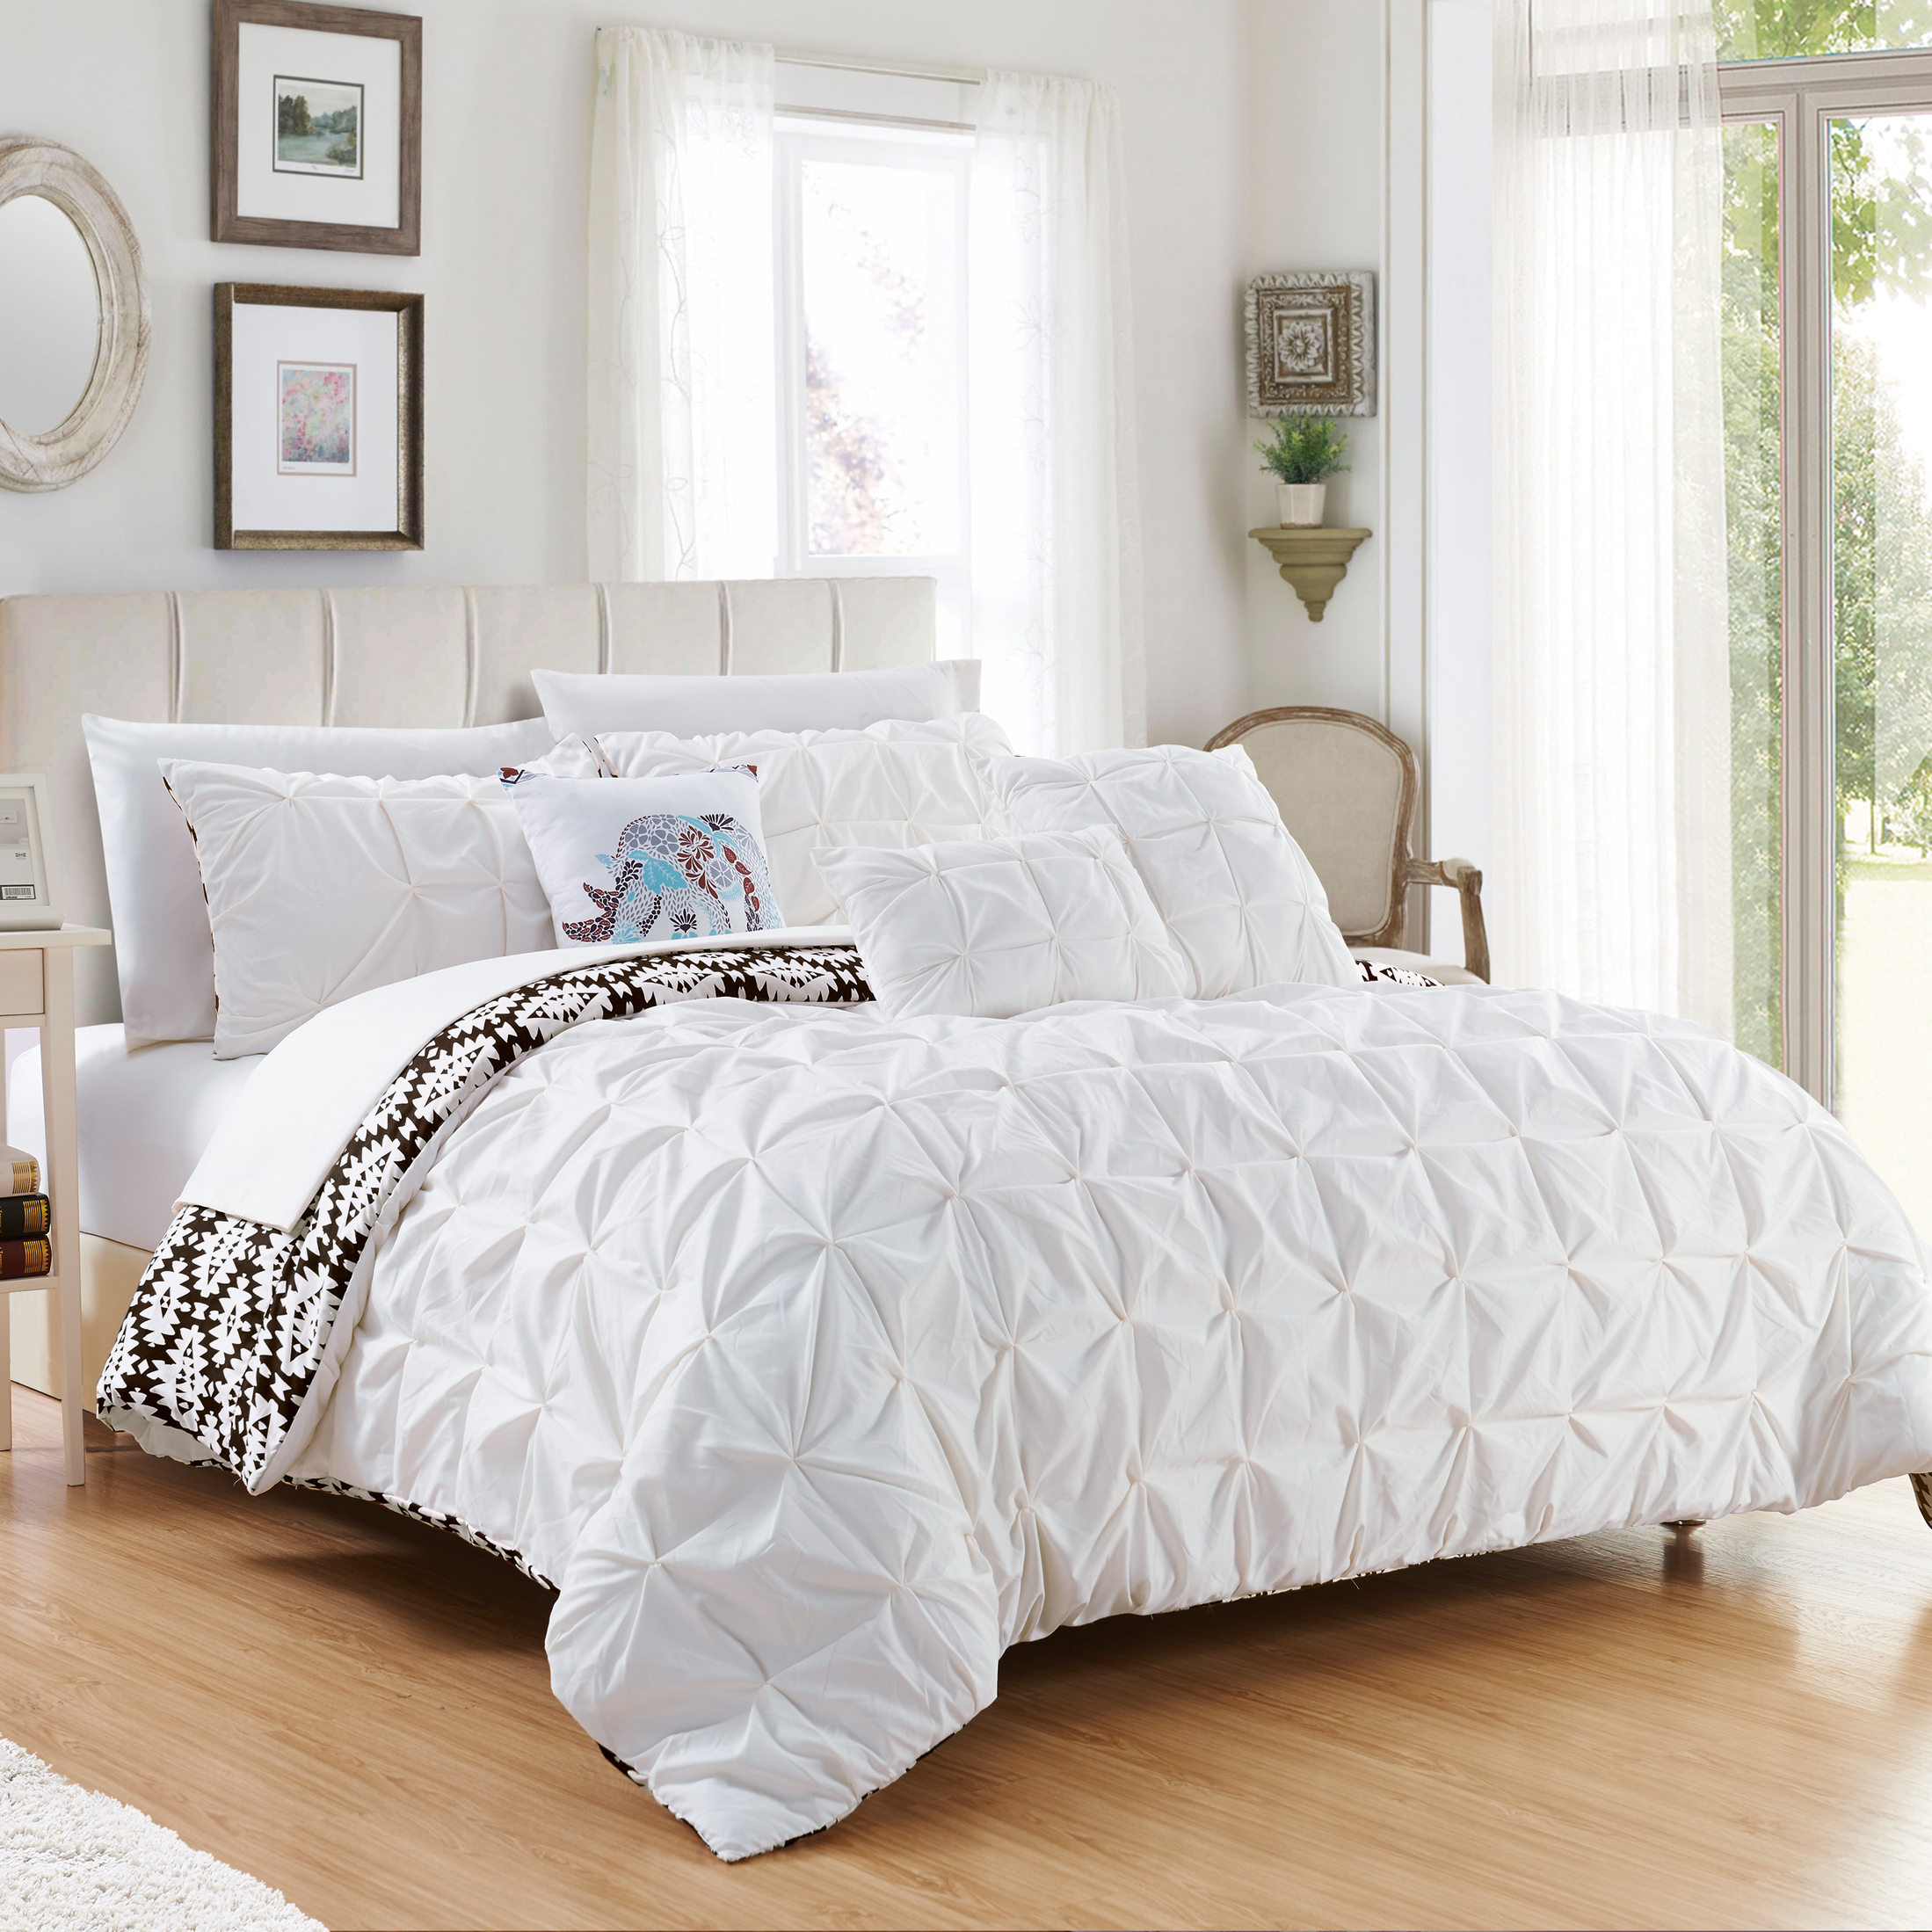 Rahab 10 Or 8 Piece Reversible Comforter Set Complete Bed In A Bag Pintuck Pleated And Aztec Inspired - White, Twin